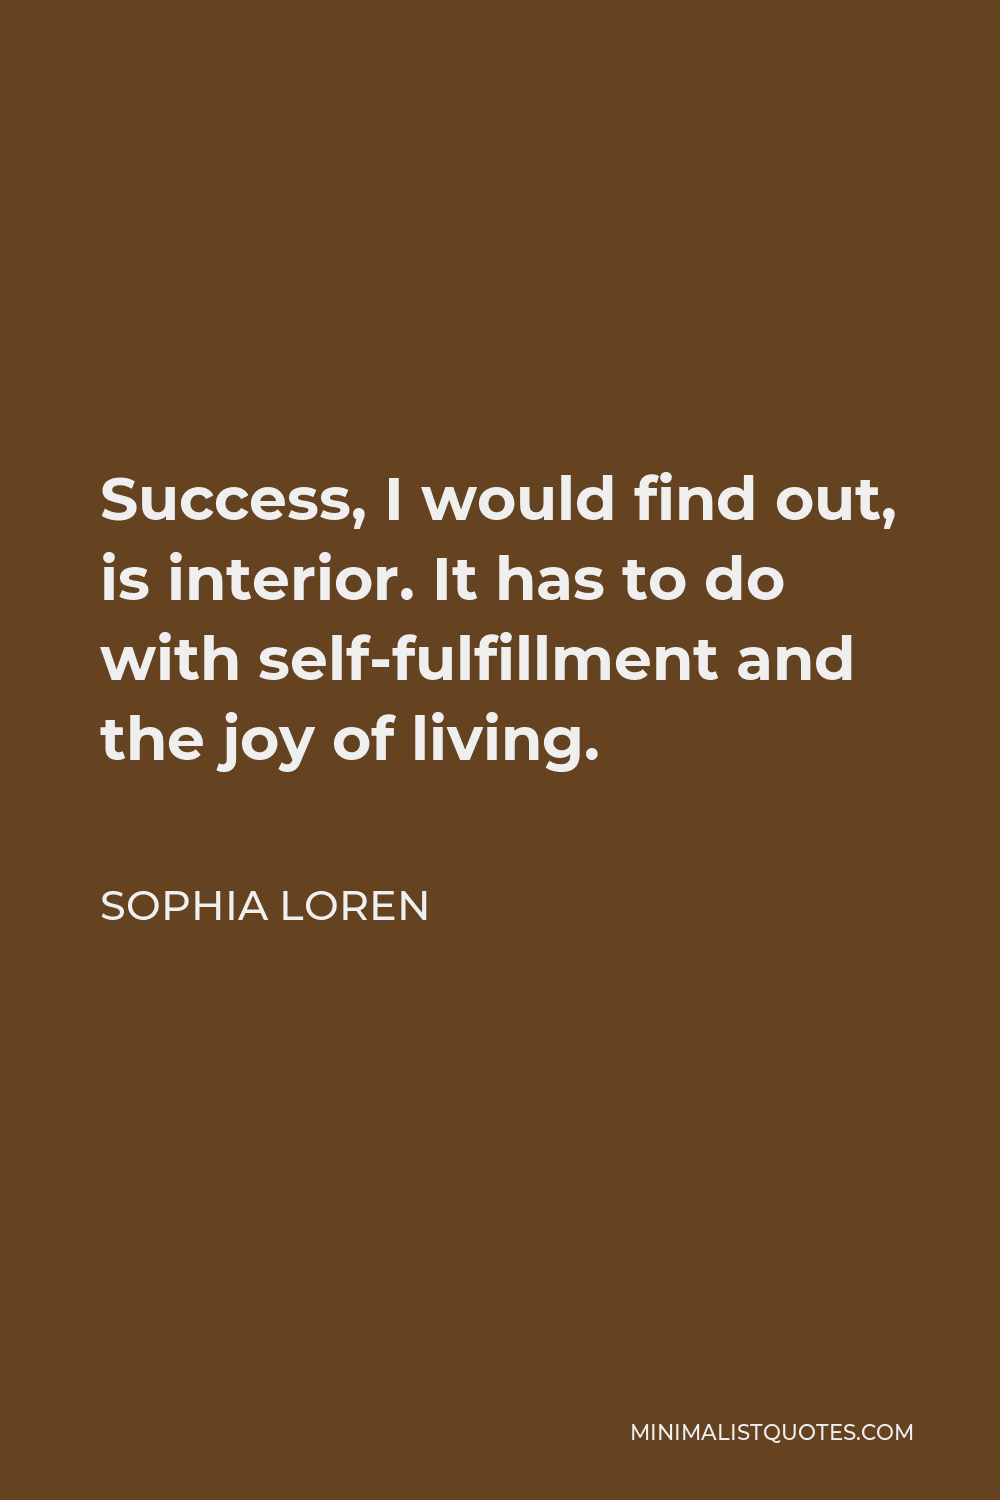 Sophia Loren Quote - Success, I would find out, is interior. It has to do with self-fulfillment and the joy of living.